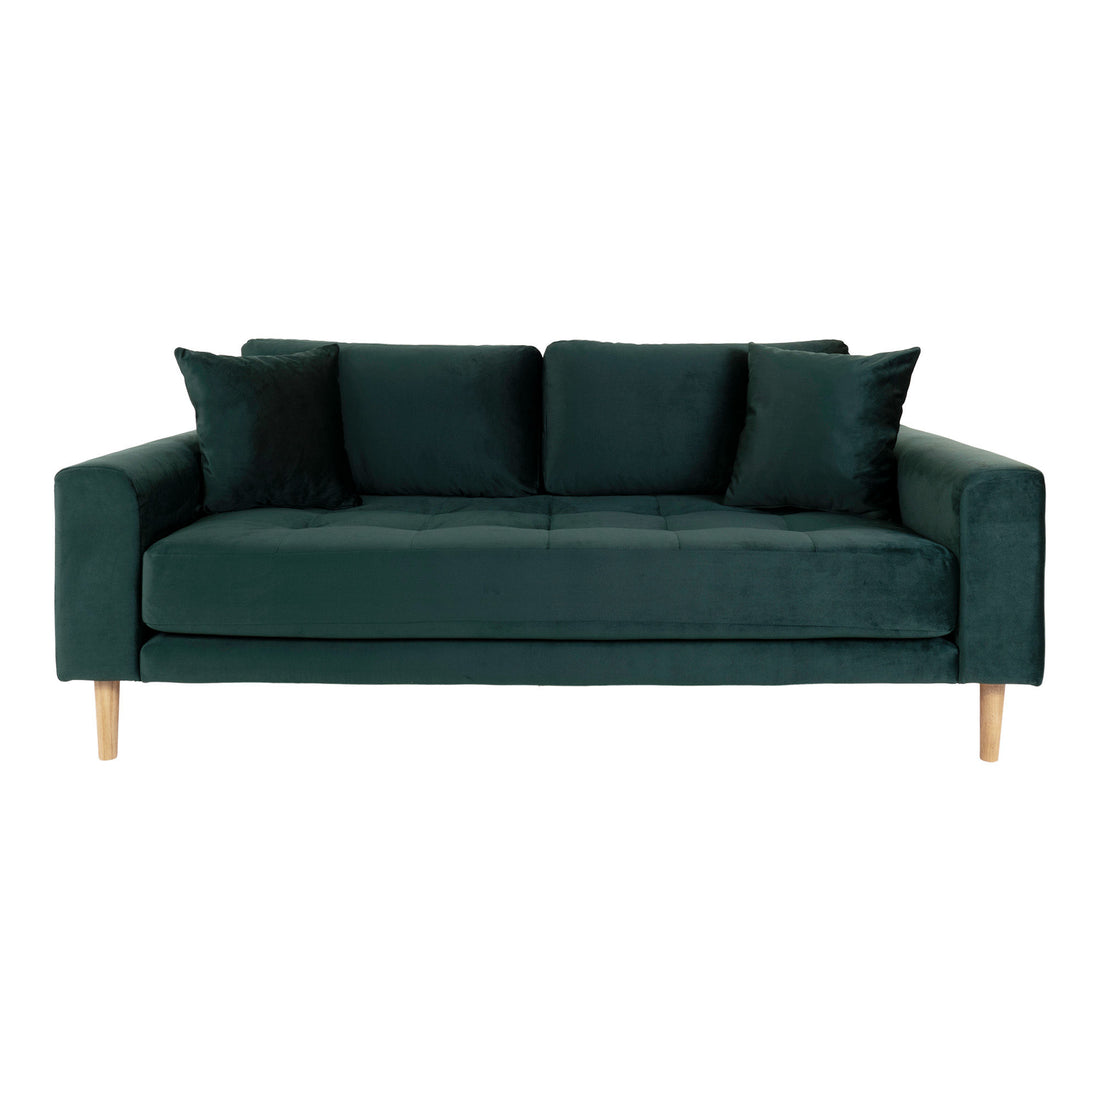 Lido 2.5 -person sofa - 2.5 -person sofa in Veolur, dark green with two pillows and nature wooden legs, HN1006 - 1 - pcs